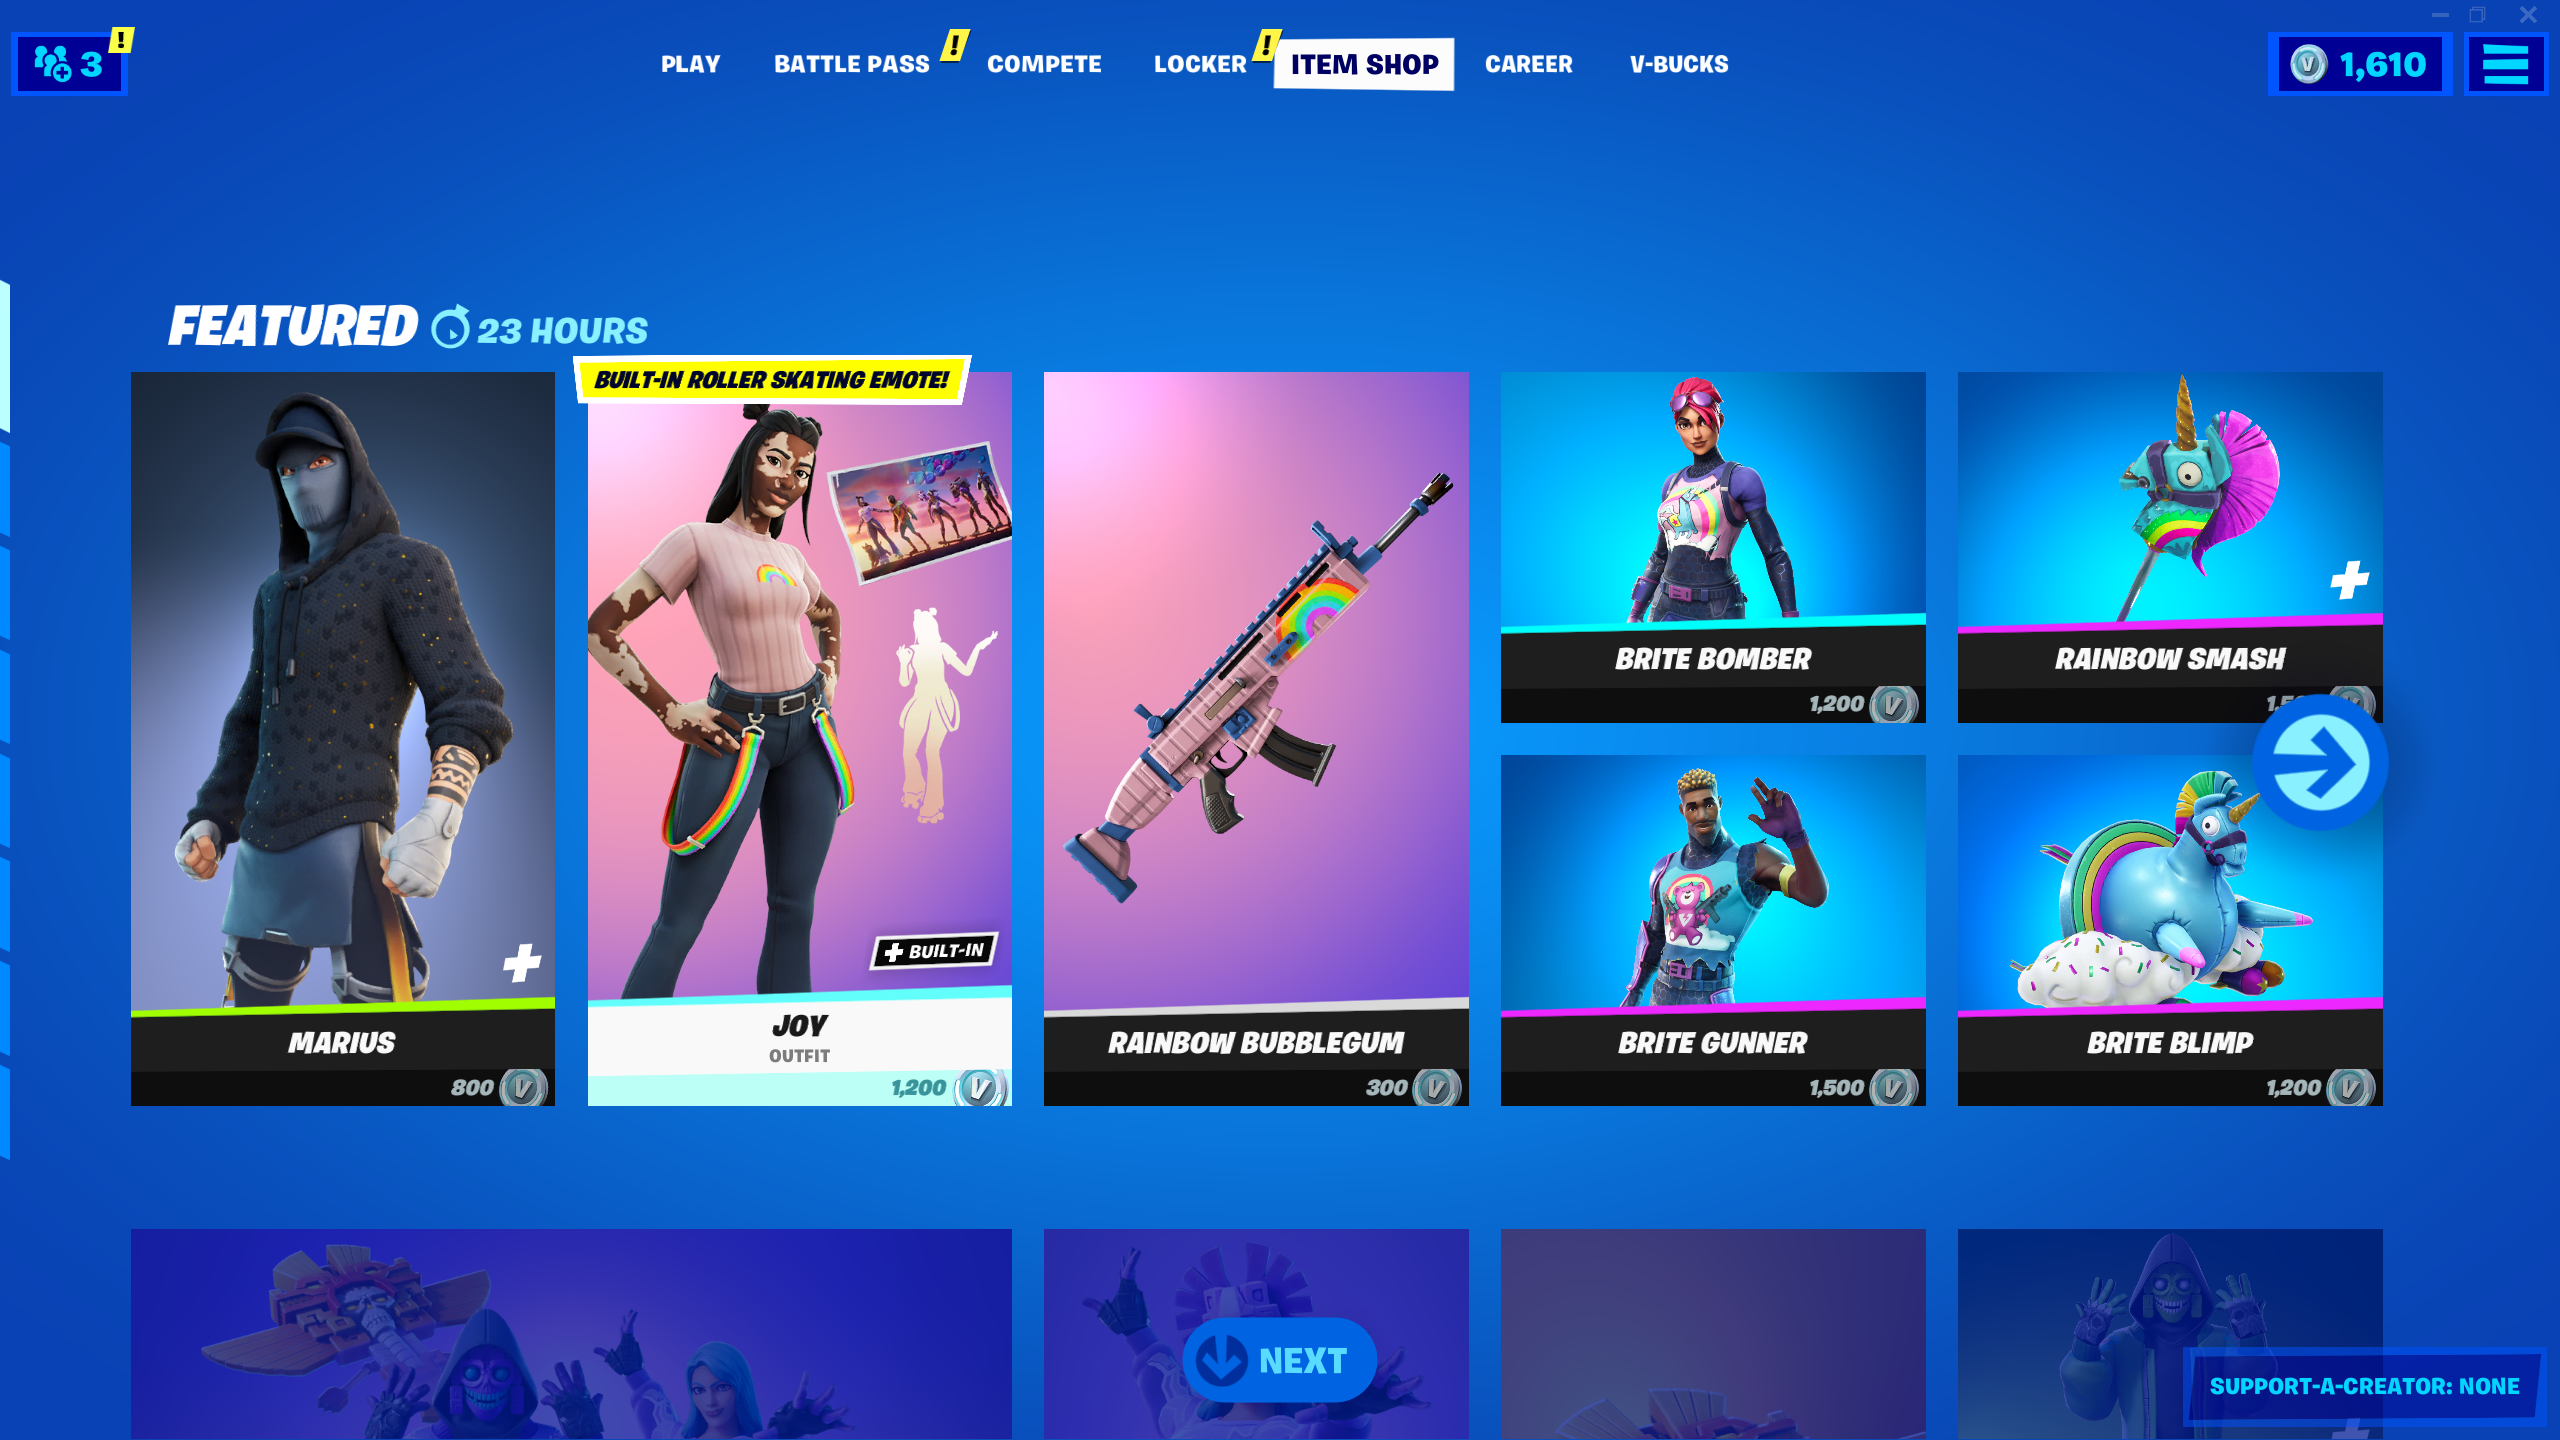 what is in the item shop today